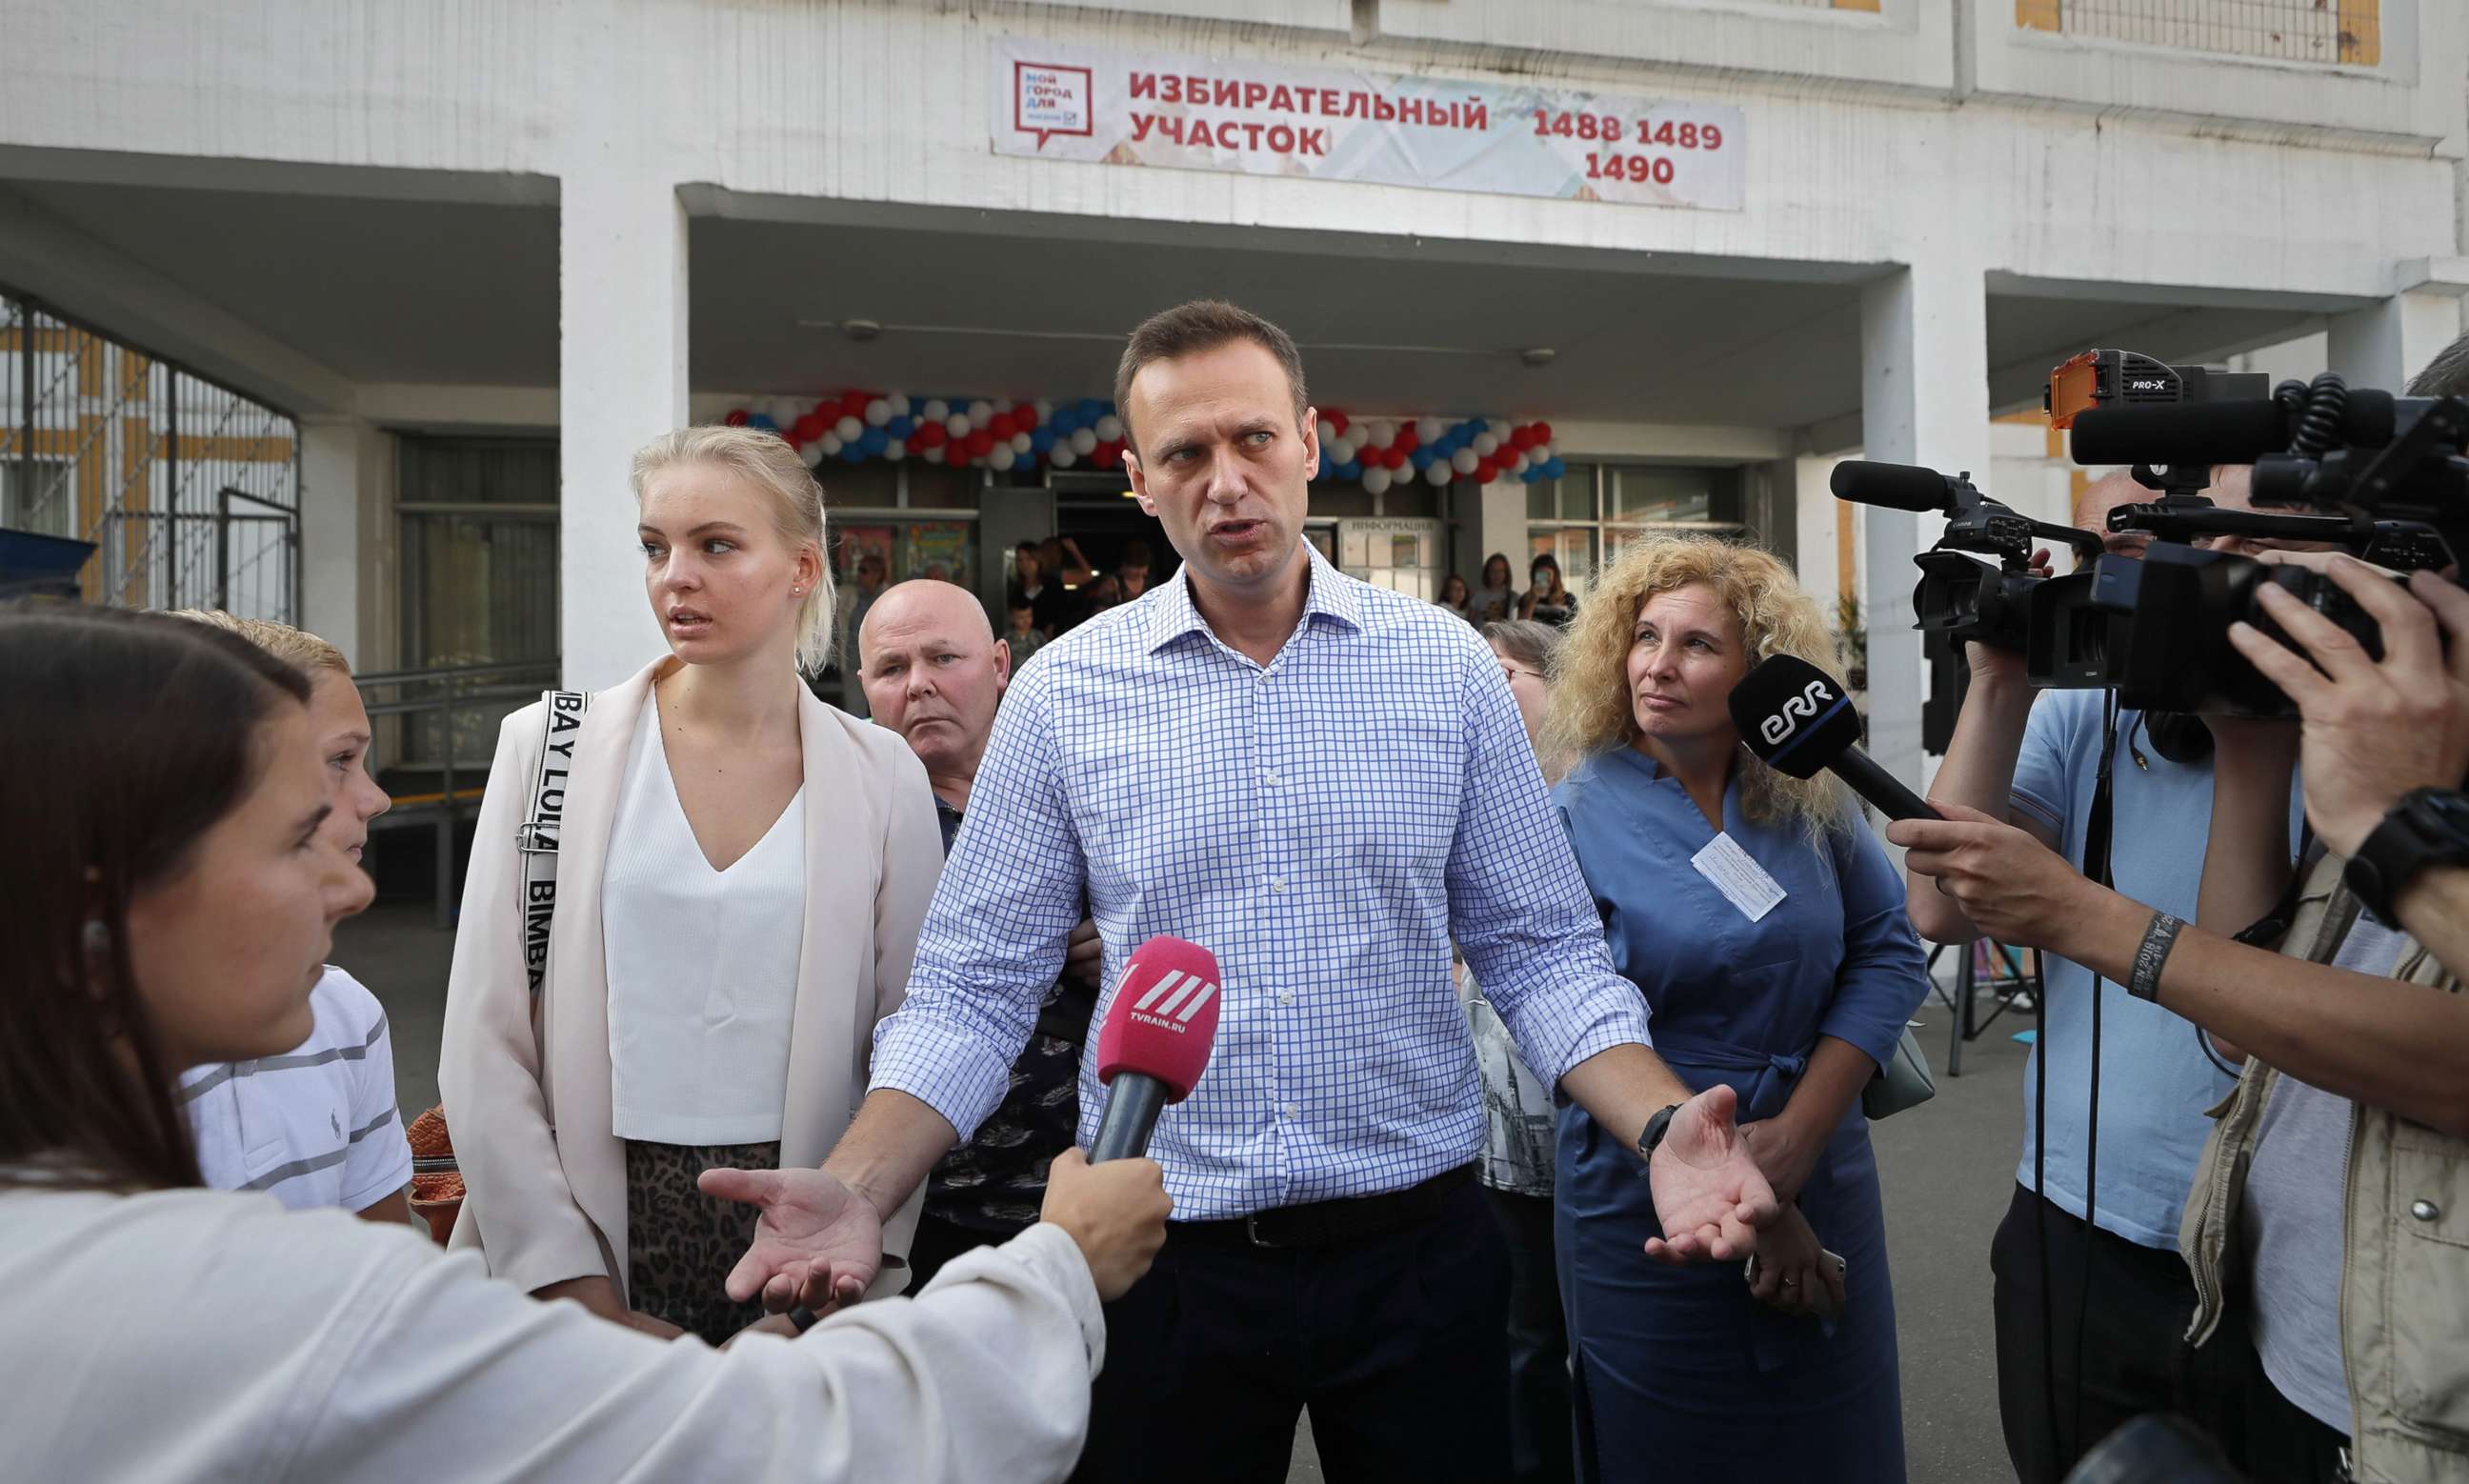 PHOTO: Russian opposition candidate Alexei Navalny speaks to reporters after voting in the Moscow City Duma elections in Moscow, Sept. 8, 2019.